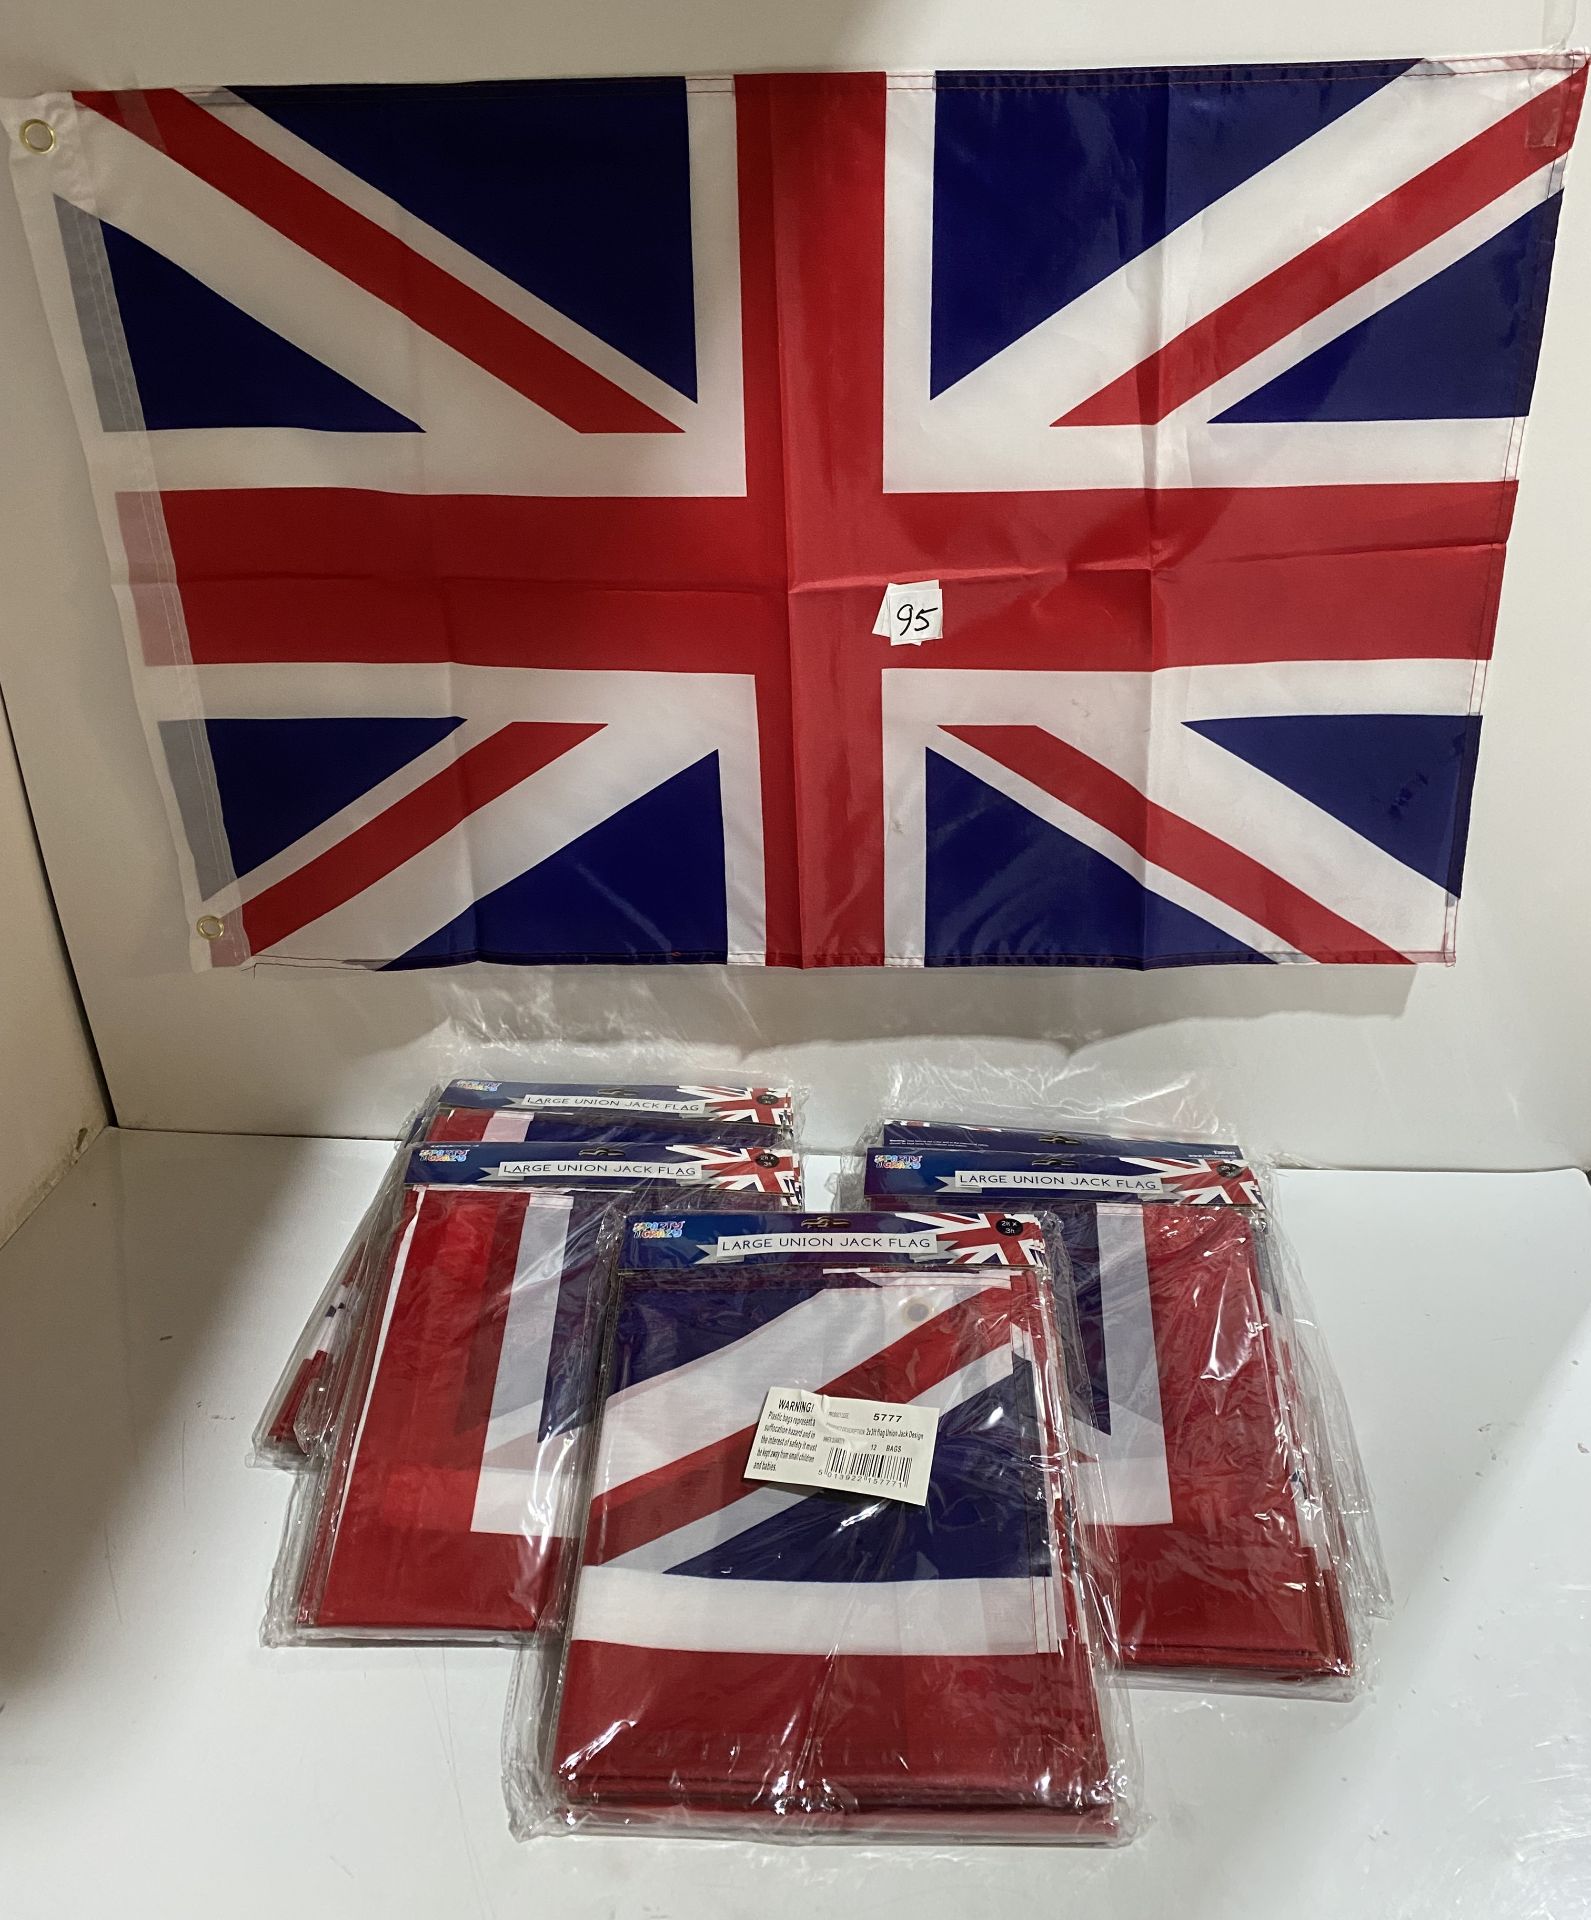 7 x packs of 12 large union jack flags with 2 brass eyelets (saleroom location: G12)